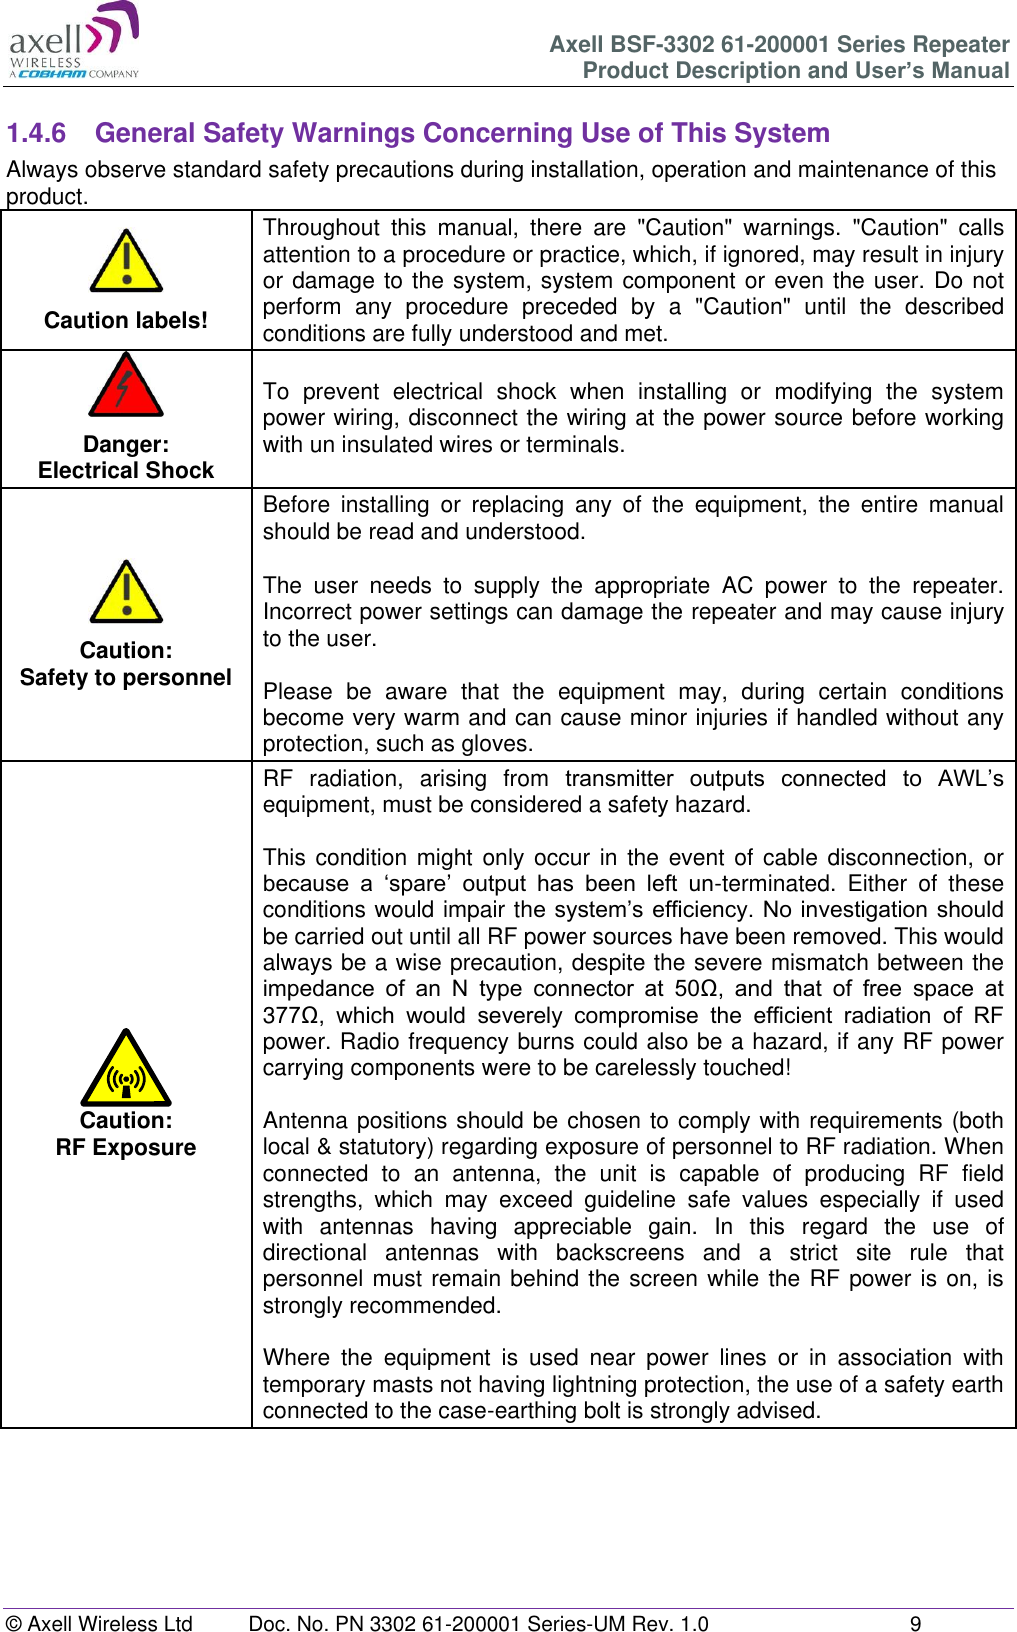 Axell BSF-3302 61-200001 Series Repeater Product Description and User’s Manual © Axell Wireless Ltd  Doc. No. PN 3302 61-200001 Series-UM Rev. 1.0  9   1.4.6  General Safety Warnings Concerning Use of This System Always observe standard safety precautions during installation, operation and maintenance of this product. Caution labels! Throughout  this  manual,  there  are  &quot;Caution&quot;  warnings.  &quot;Caution&quot;  calls attention to a procedure or practice, which, if ignored, may result in injury or damage to the system, system component or even the user. Do not perform  any  procedure  preceded  by  a  &quot;Caution&quot;  until  the  described conditions are fully understood and met.  Danger: Electrical Shock To  prevent  electrical  shock  when  installing  or  modifying  the  system power wiring, disconnect the wiring at the power source before working with un insulated wires or terminals. Caution: Safety to personnel Before  installing  or  replacing  any  of  the  equipment,  the  entire  manual should be read and understood.  The  user  needs  to  supply  the  appropriate  AC  power  to  the  repeater. Incorrect power settings can damage the repeater and may cause injury to the user.  Please  be  aware  that  the  equipment  may,  during  certain  conditions become very warm and can cause minor injuries if handled without any protection, such as gloves. Caution: RF Exposure RF  radiation,  arising  from  transmitter  outputs  connected  to  AWL’s equipment, must be considered a safety hazard.  This condition might  only  occur  in the event of cable  disconnection,  or because  a  ‘spare’  output  has  been  left  un-terminated.  Either  of  these conditions would impair the system’s efficiency. No investigation should be carried out until all RF power sources have been removed. This would always be a wise precaution, despite the severe mismatch between the impedance  of  an  N  type  connector  at  50Ω,  and  that  of  free  space  at 377Ω,  which  would  severely  compromise  the  efficient  radiation  of  RF power. Radio frequency burns could also be a hazard, if any RF power carrying components were to be carelessly touched!  Antenna positions should be chosen to comply with requirements (both local &amp; statutory) regarding exposure of personnel to RF radiation. When connected  to  an  antenna,  the  unit  is  capable  of  producing  RF  field strengths,  which  may  exceed  guideline  safe  values  especially  if  used with  antennas  having  appreciable  gain.  In  this  regard  the  use  of directional  antennas  with  backscreens  and  a  strict  site  rule  that personnel must remain behind the screen while the RF power is on, is strongly recommended.  Where  the  equipment  is  used  near  power  lines  or  in  association  with temporary masts not having lightning protection, the use of a safety earth connected to the case-earthing bolt is strongly advised.         